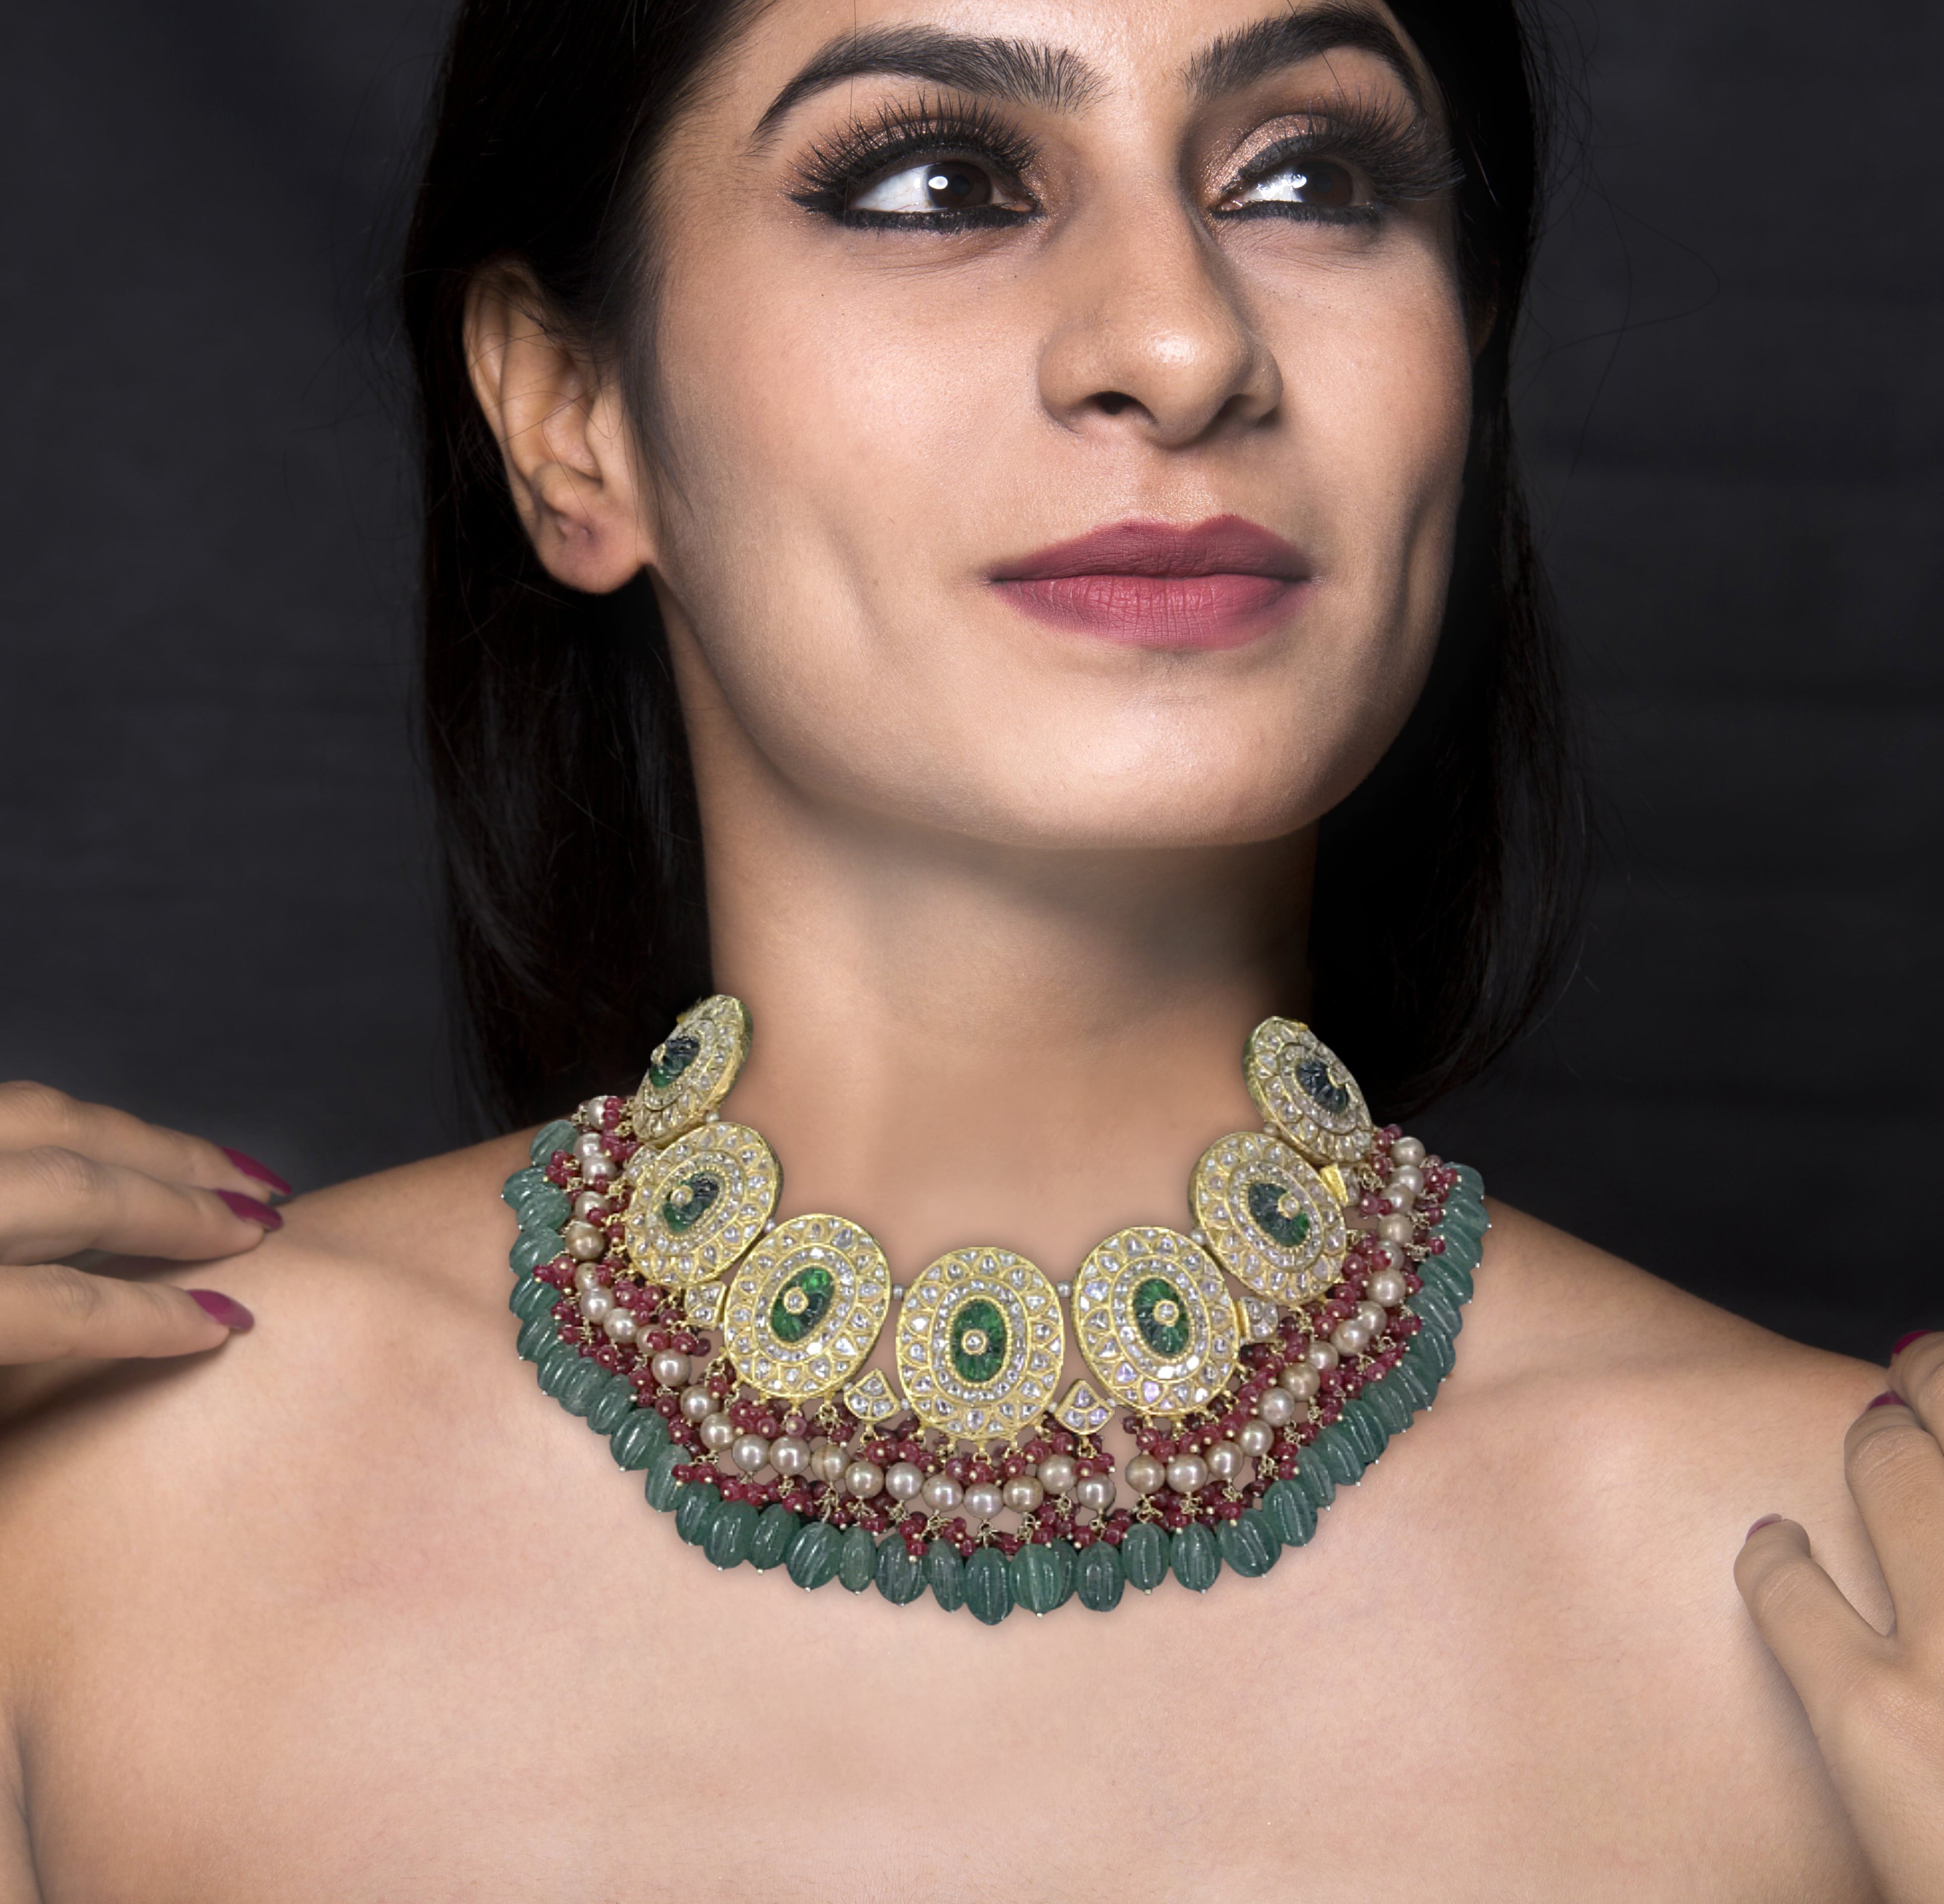 23k Gold and Diamond Polki Necklace with Antiqued Hyderabadi Pearls, Rubies and Green Strawberry Quartz